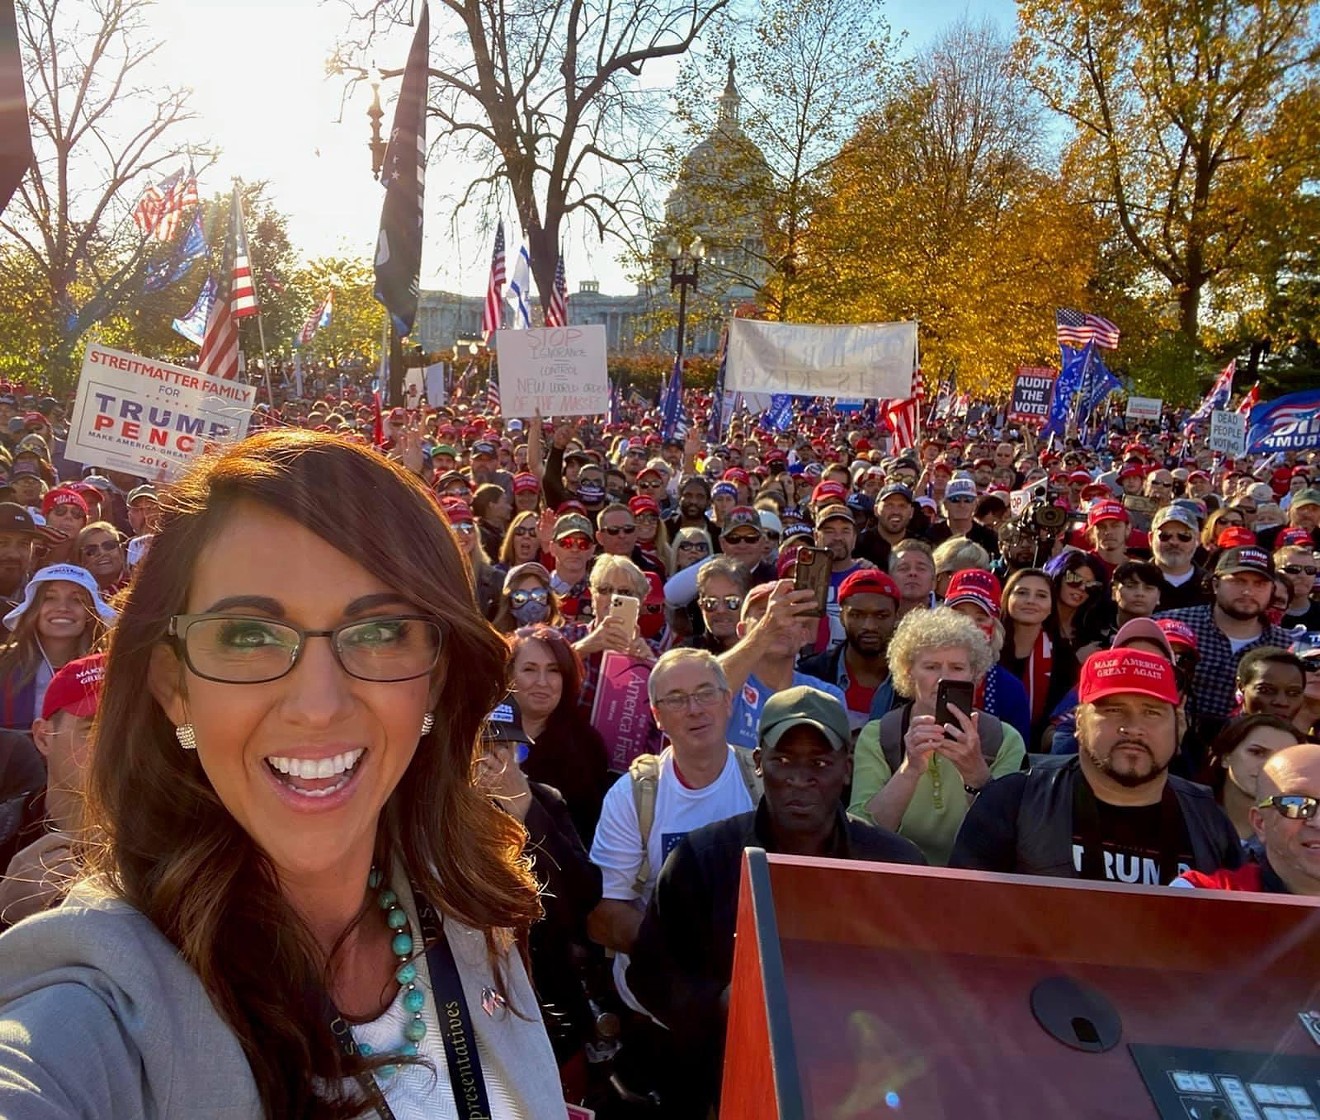 The MillionMAGAMarch summed up in one tweeted photo: Lauren Boebert in front of a sole Black guy who looks like he's just realized where he's standing.